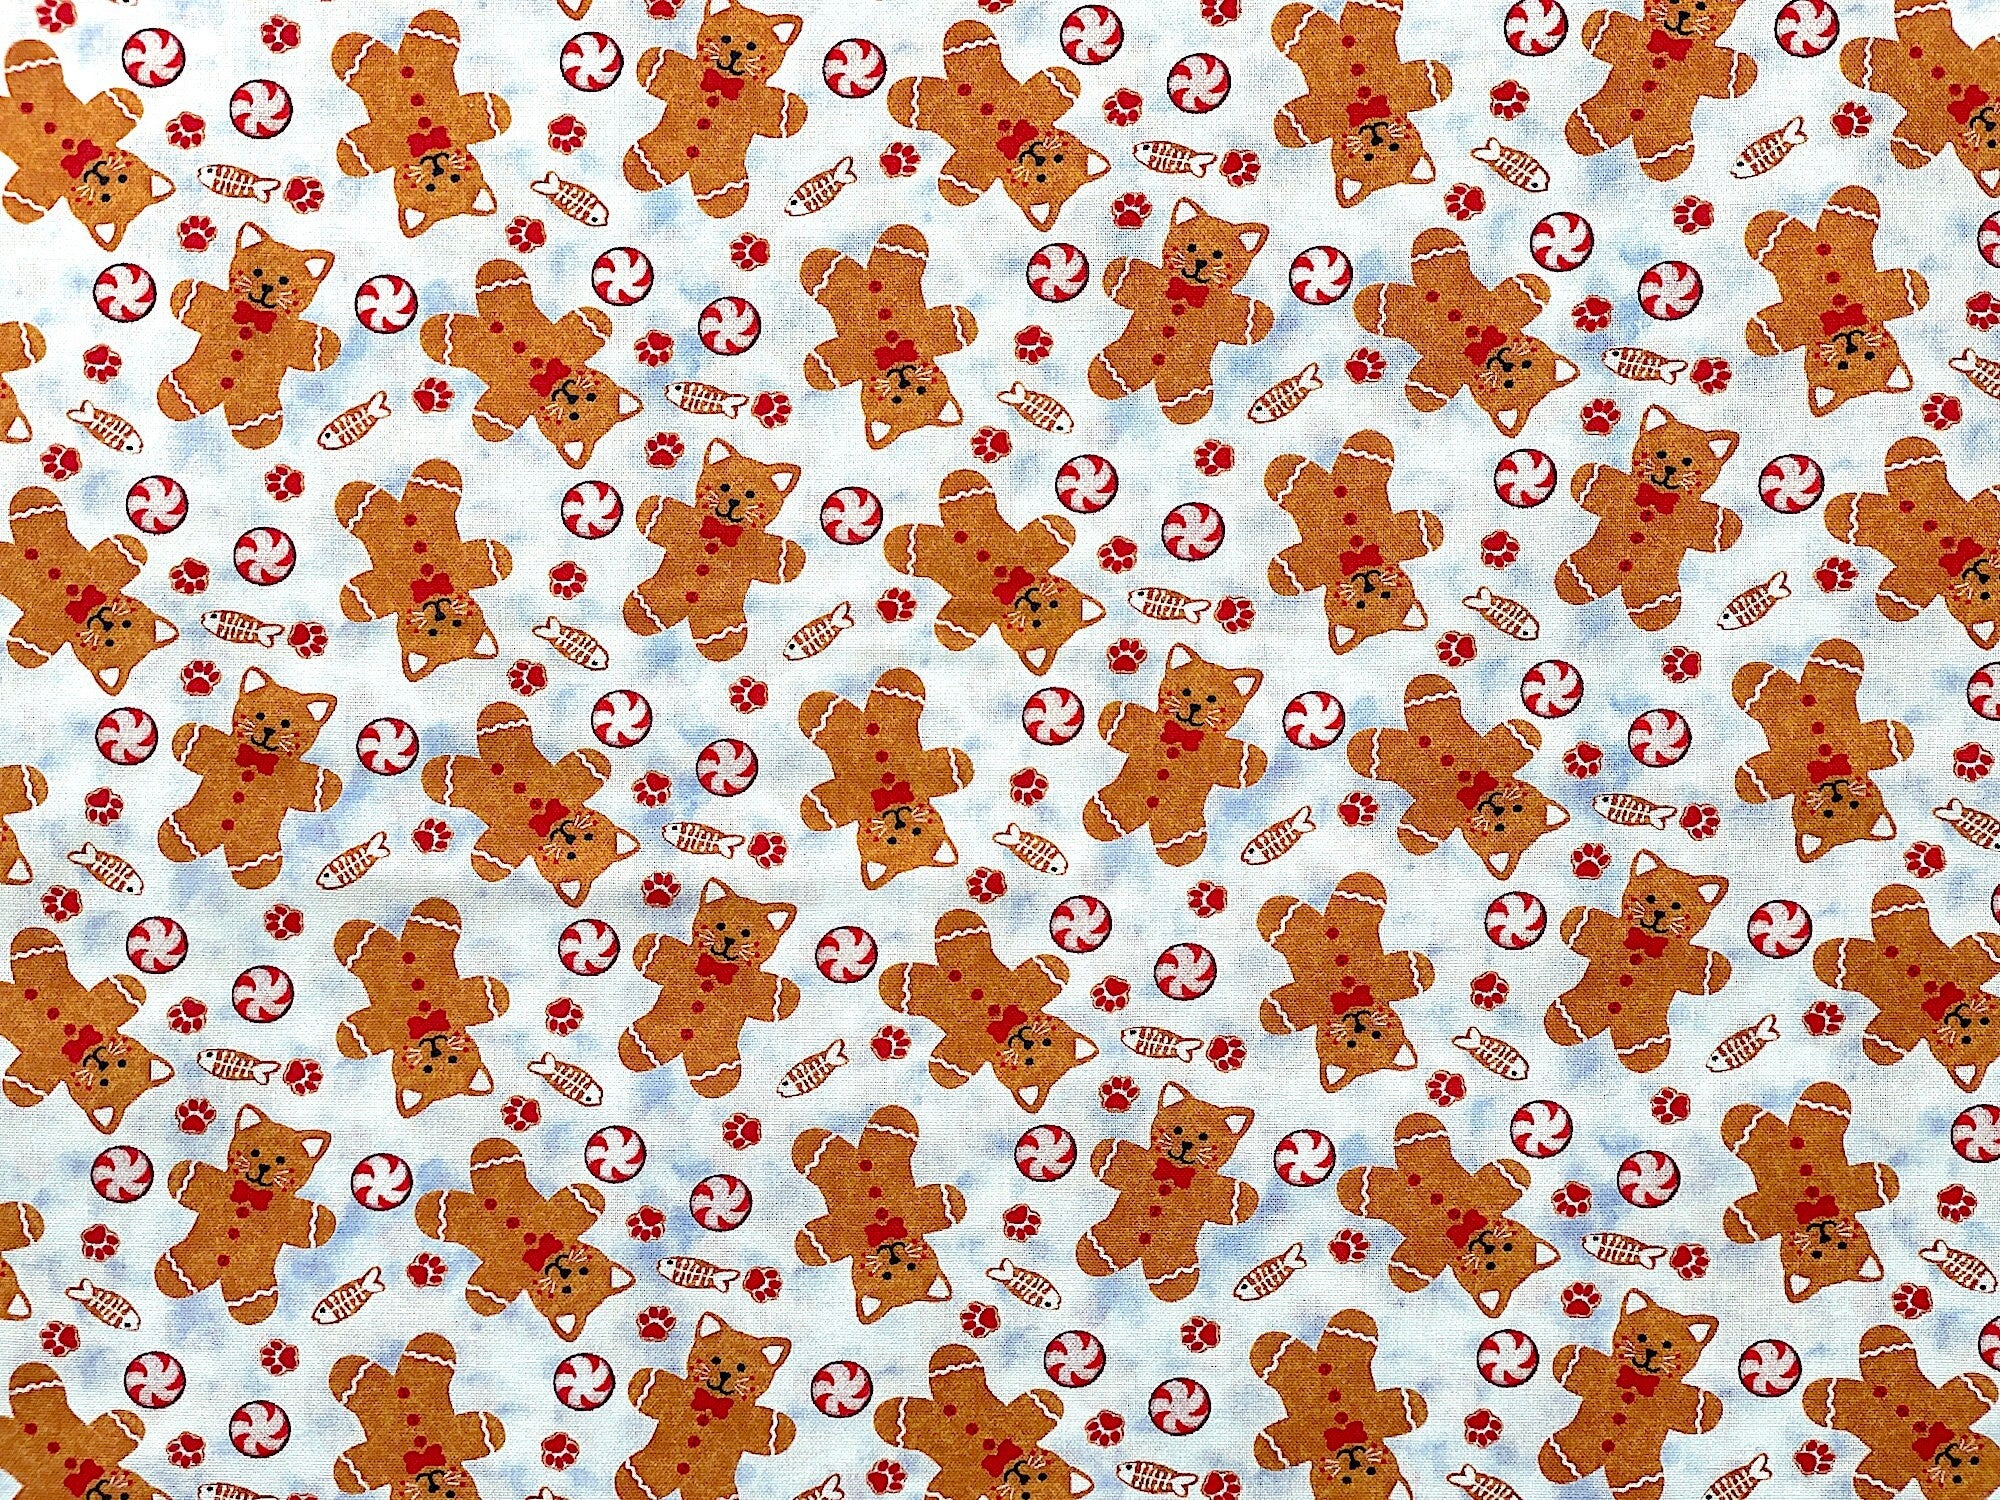 Kittens are one of the most popular pets in the world. This mischievous creature inspired Kayomi Harai’s next fabric collection for Studio e Fabrics. “Kitten Christmas” is a digital Christmas collection featuring cute kittens impersonating Santa Claus. This is the perfect holiday collection for the Cat lover. This design has sweet little Gingerbread kittens and Peppermint Candies